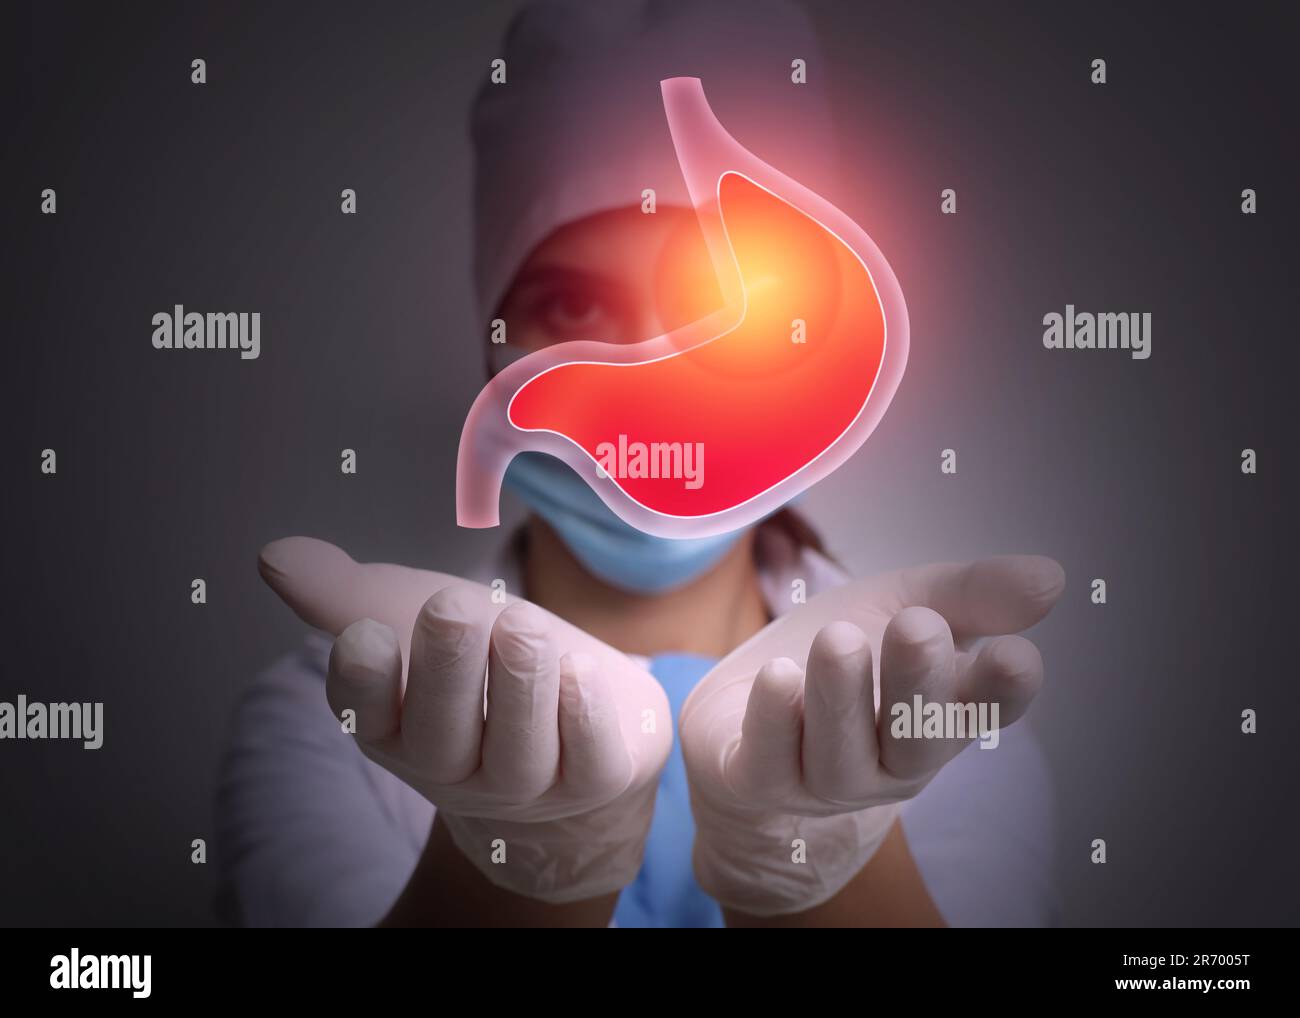 Treatment of heartburn and other gastrointestinal diseases. Doctor holding stomach illustration on dark background, Stock Photo